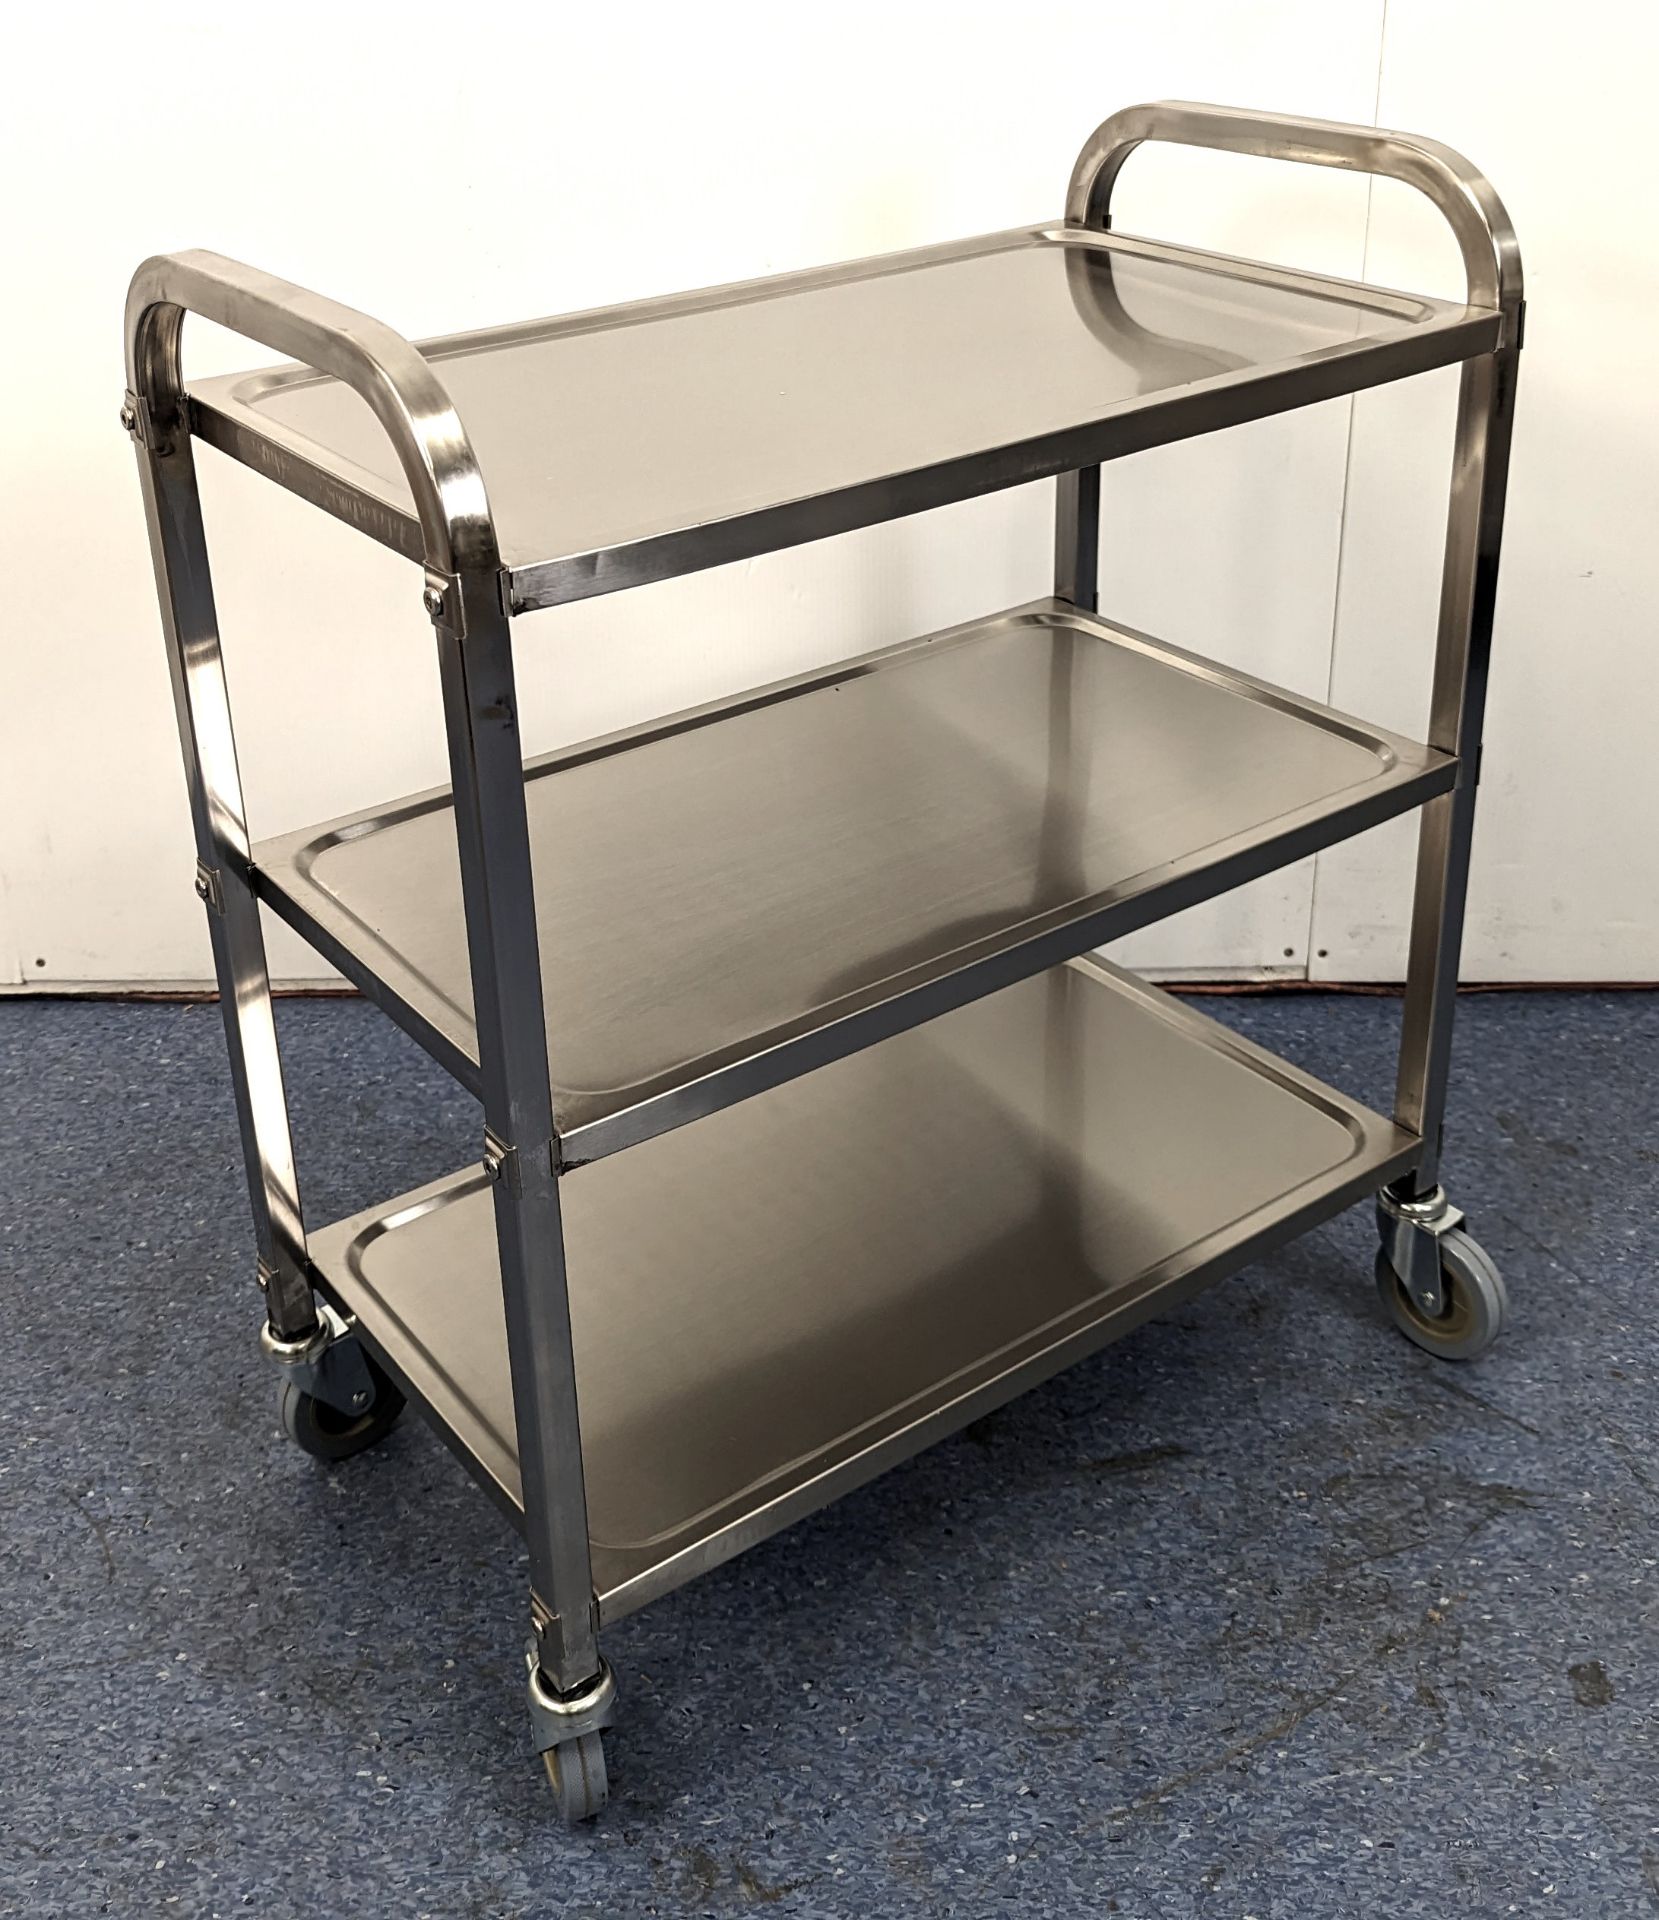 STAINLESS STEEL BUSSING CART WITH 27.25" X 15.75" TRAY SIZE, OMCAN 24418 - Image 2 of 5